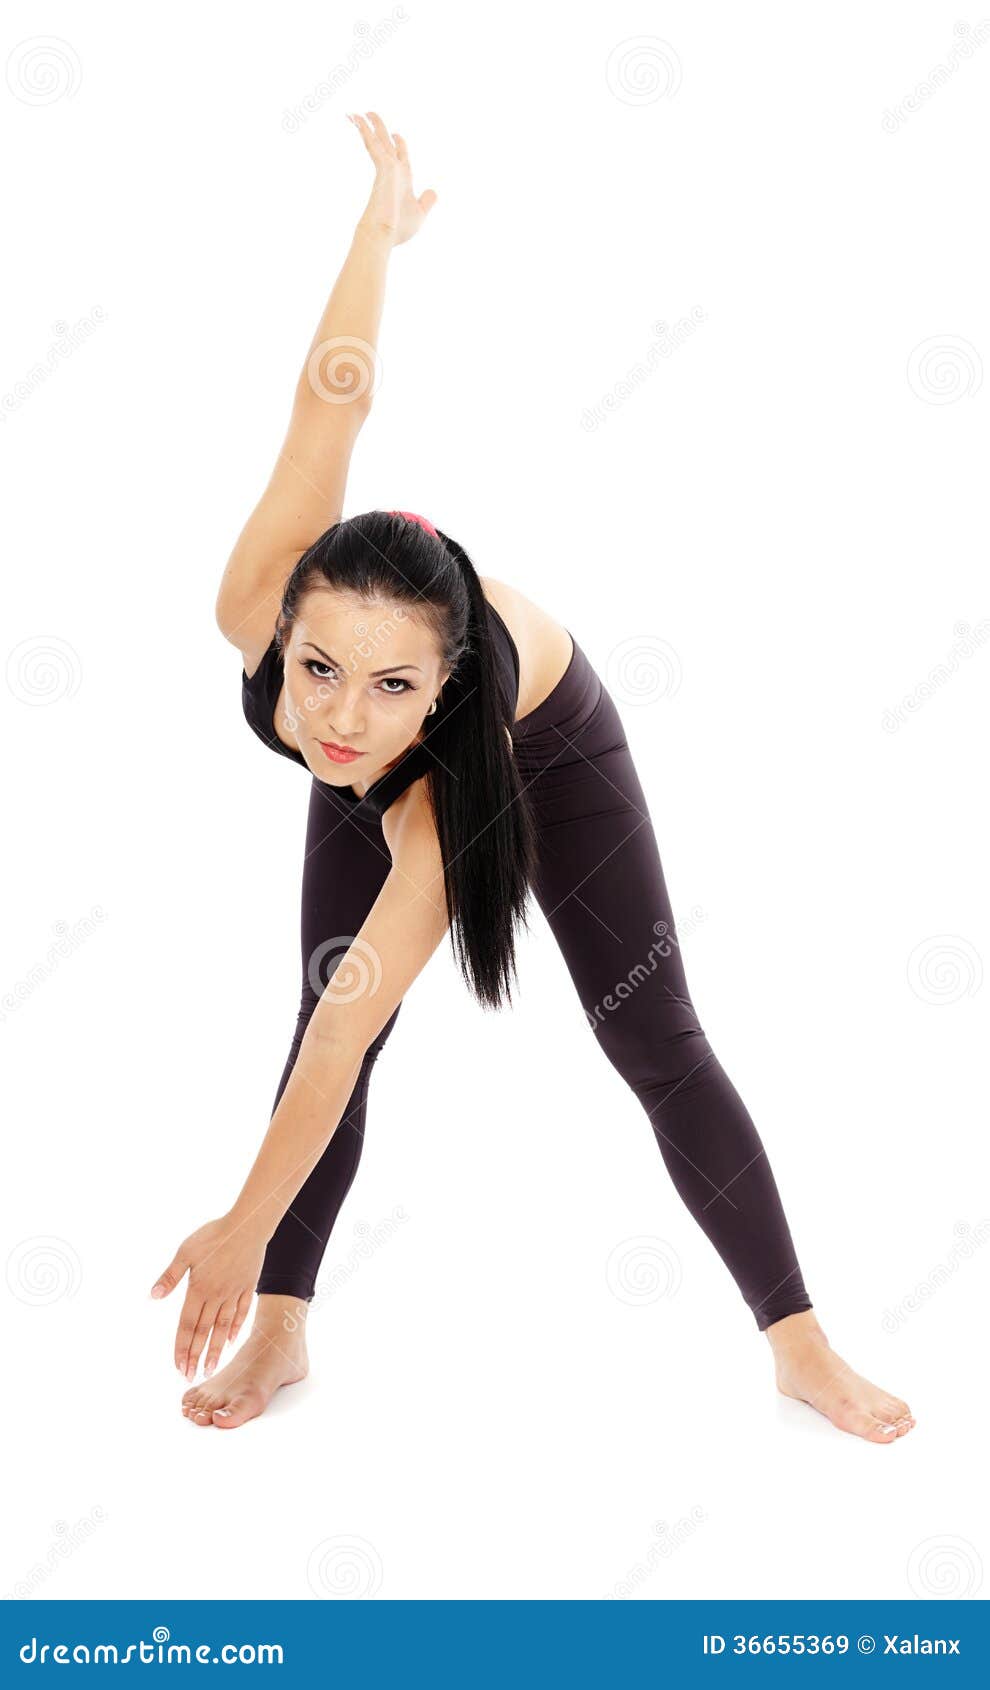 Fitness lady stretching stock image. Image of caucasian - 36655369